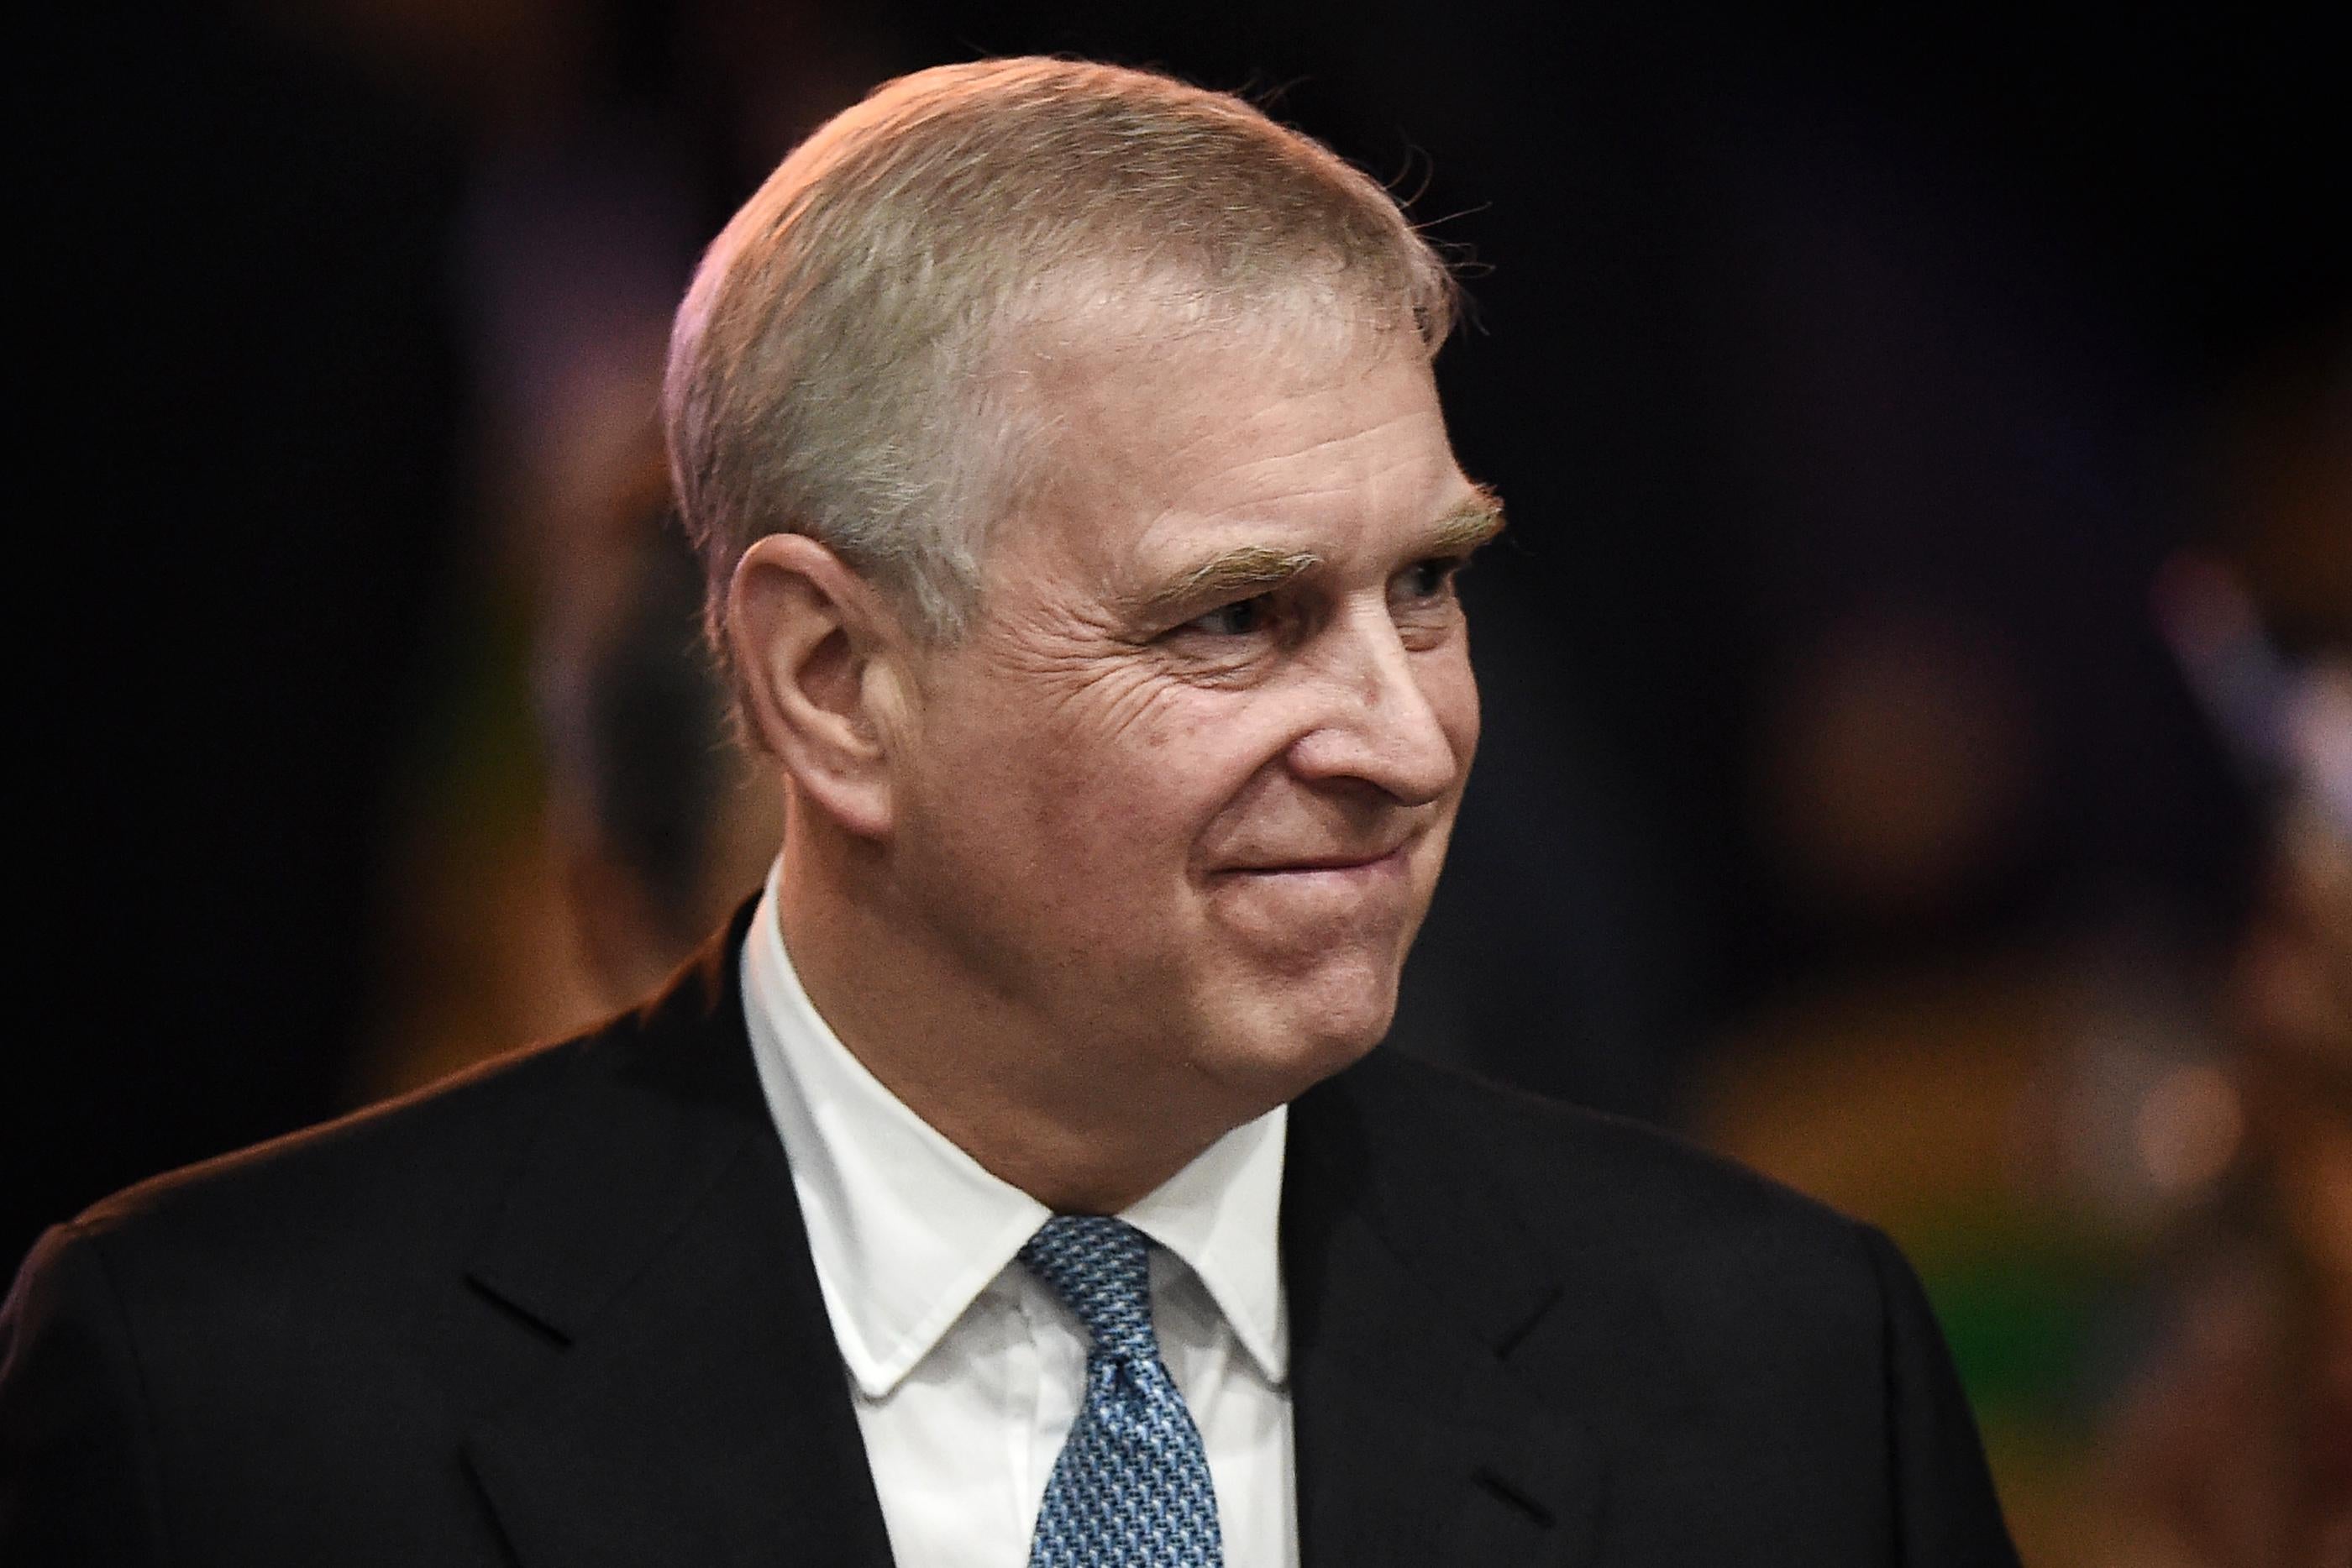 Prince Andrew offers a closed-mouth smile.